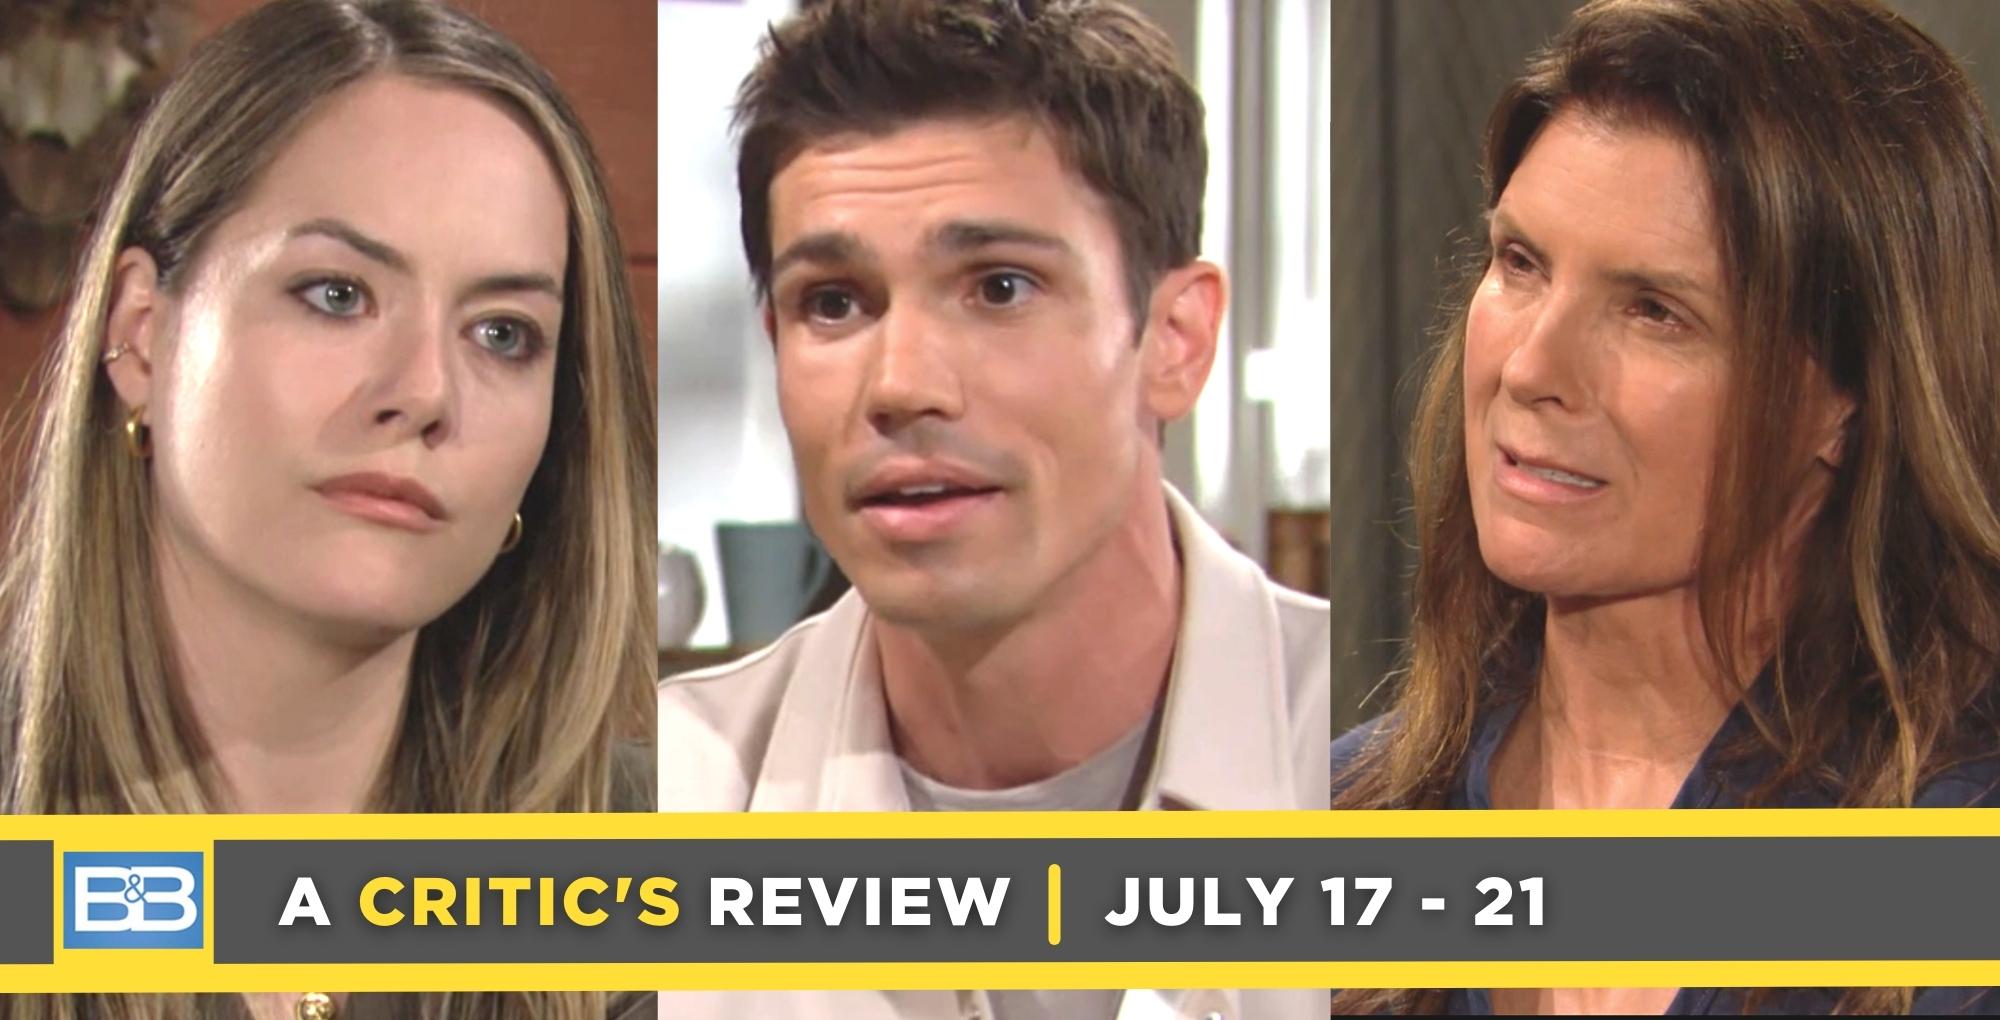 the bold and the beautiful critic's review for july 17 – july 21, 2023, three images hope, finn, and sheila.